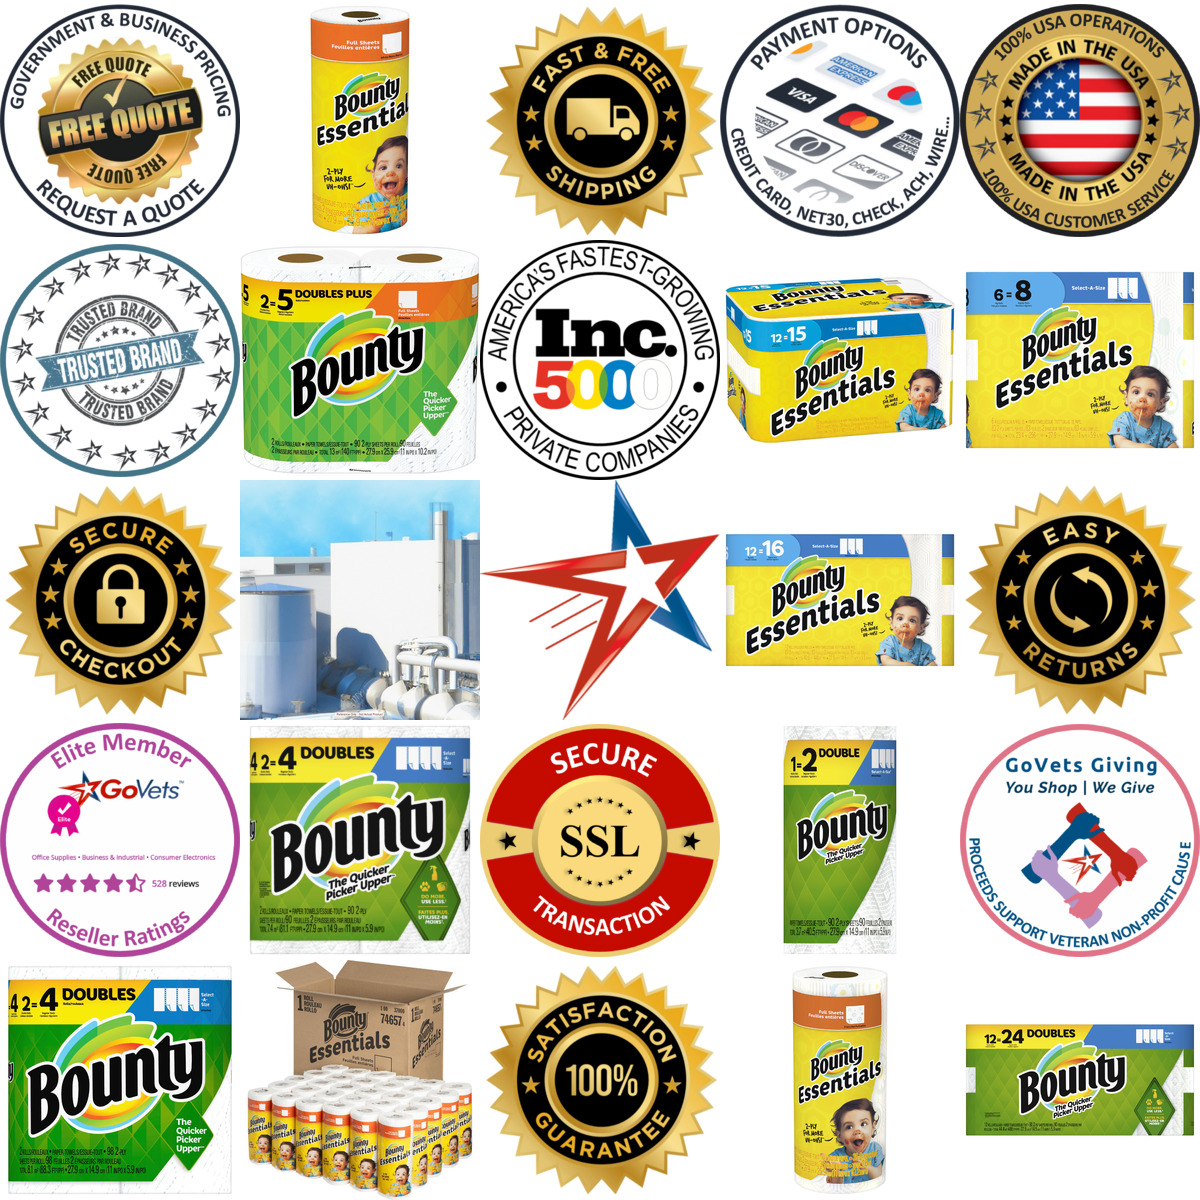 A selection of The Procter and Gamble Company products on GoVets